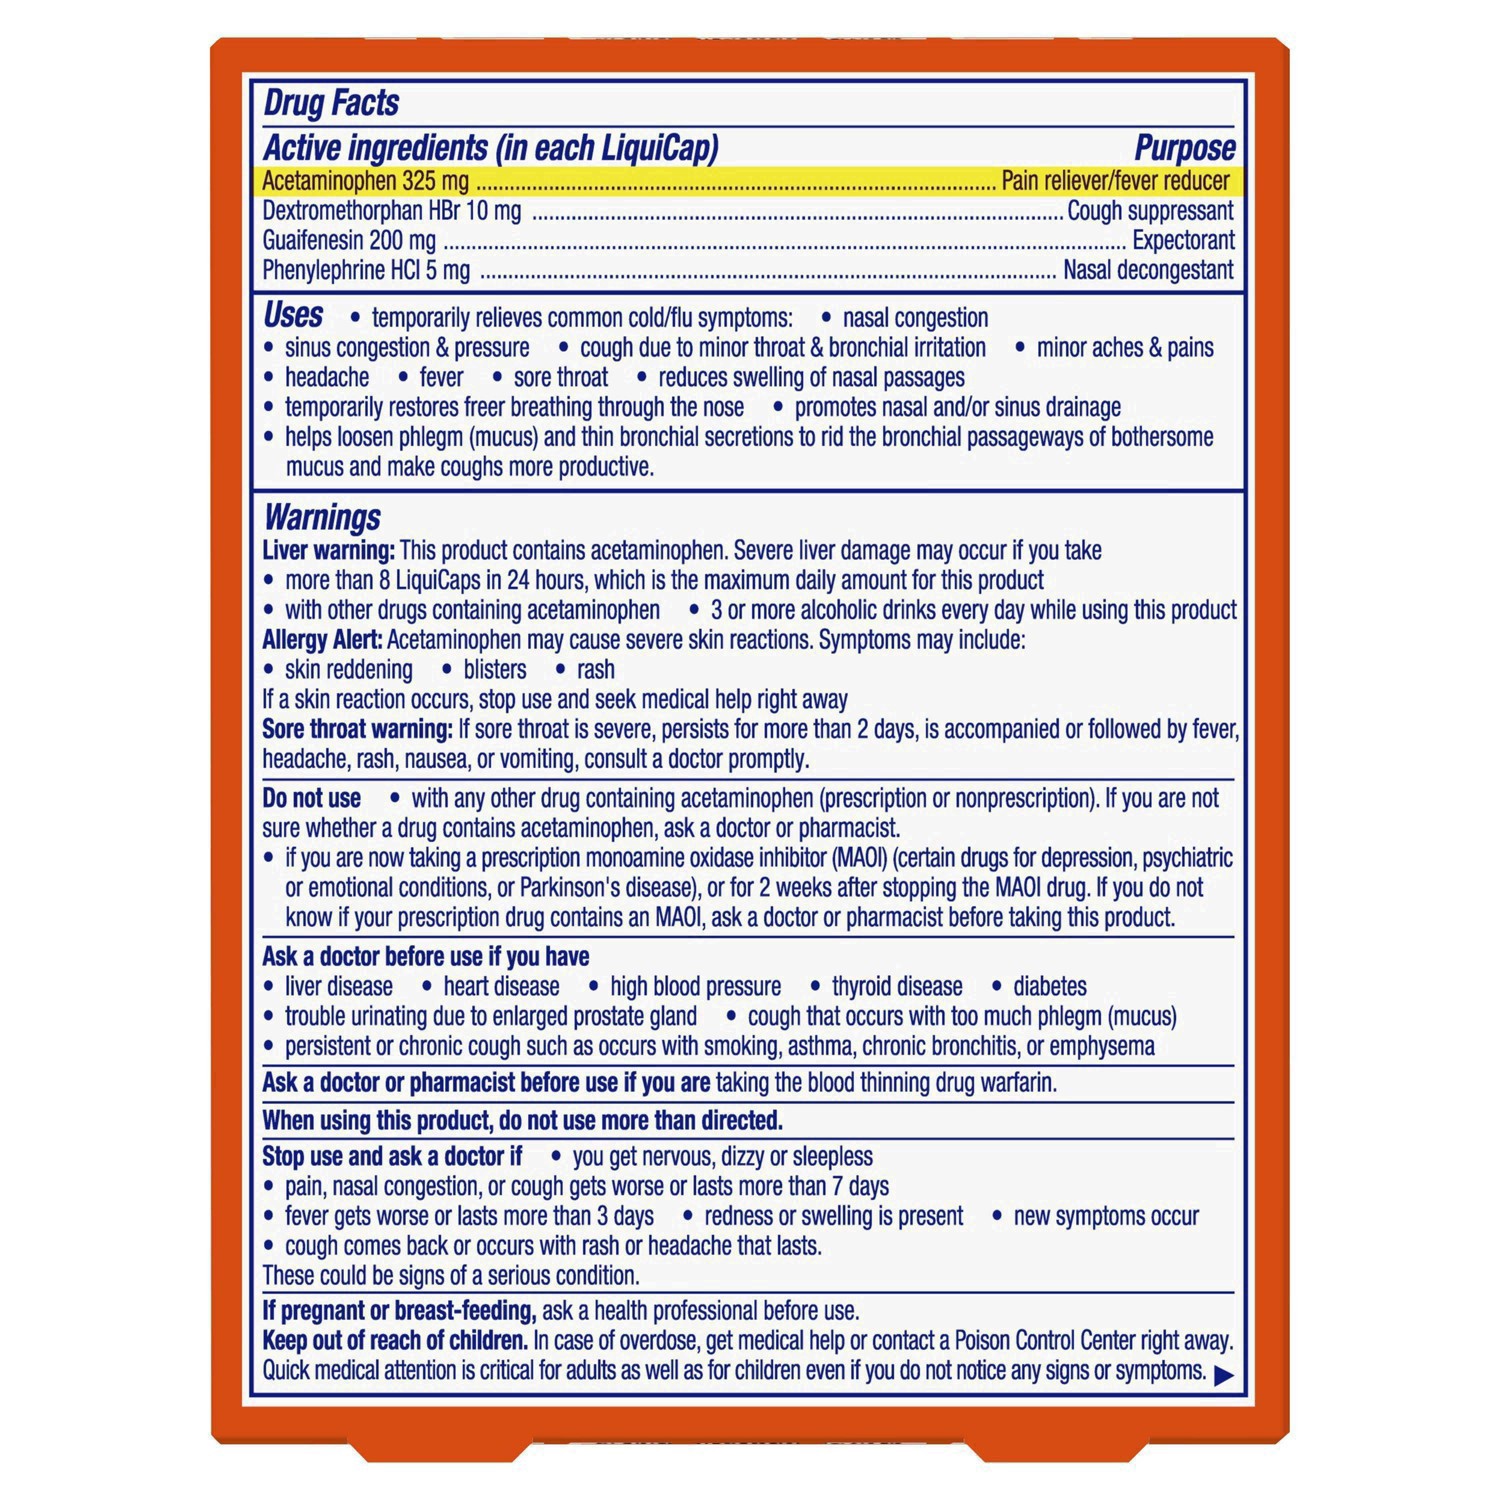 slide 15 of 46, Vicks DayQuil SEVERE Cold & Flu Medicine, Maximum Strength 9-Symptom Non-Drowsy Daytime Relief for Headache, Fever, Sore Throat, Minor Aches and Pains, Chest Congestion, Stuffy Nose, Nasal Congestion, Sinus Pressure, and Cough, 24 Liquicaps, 24 ct